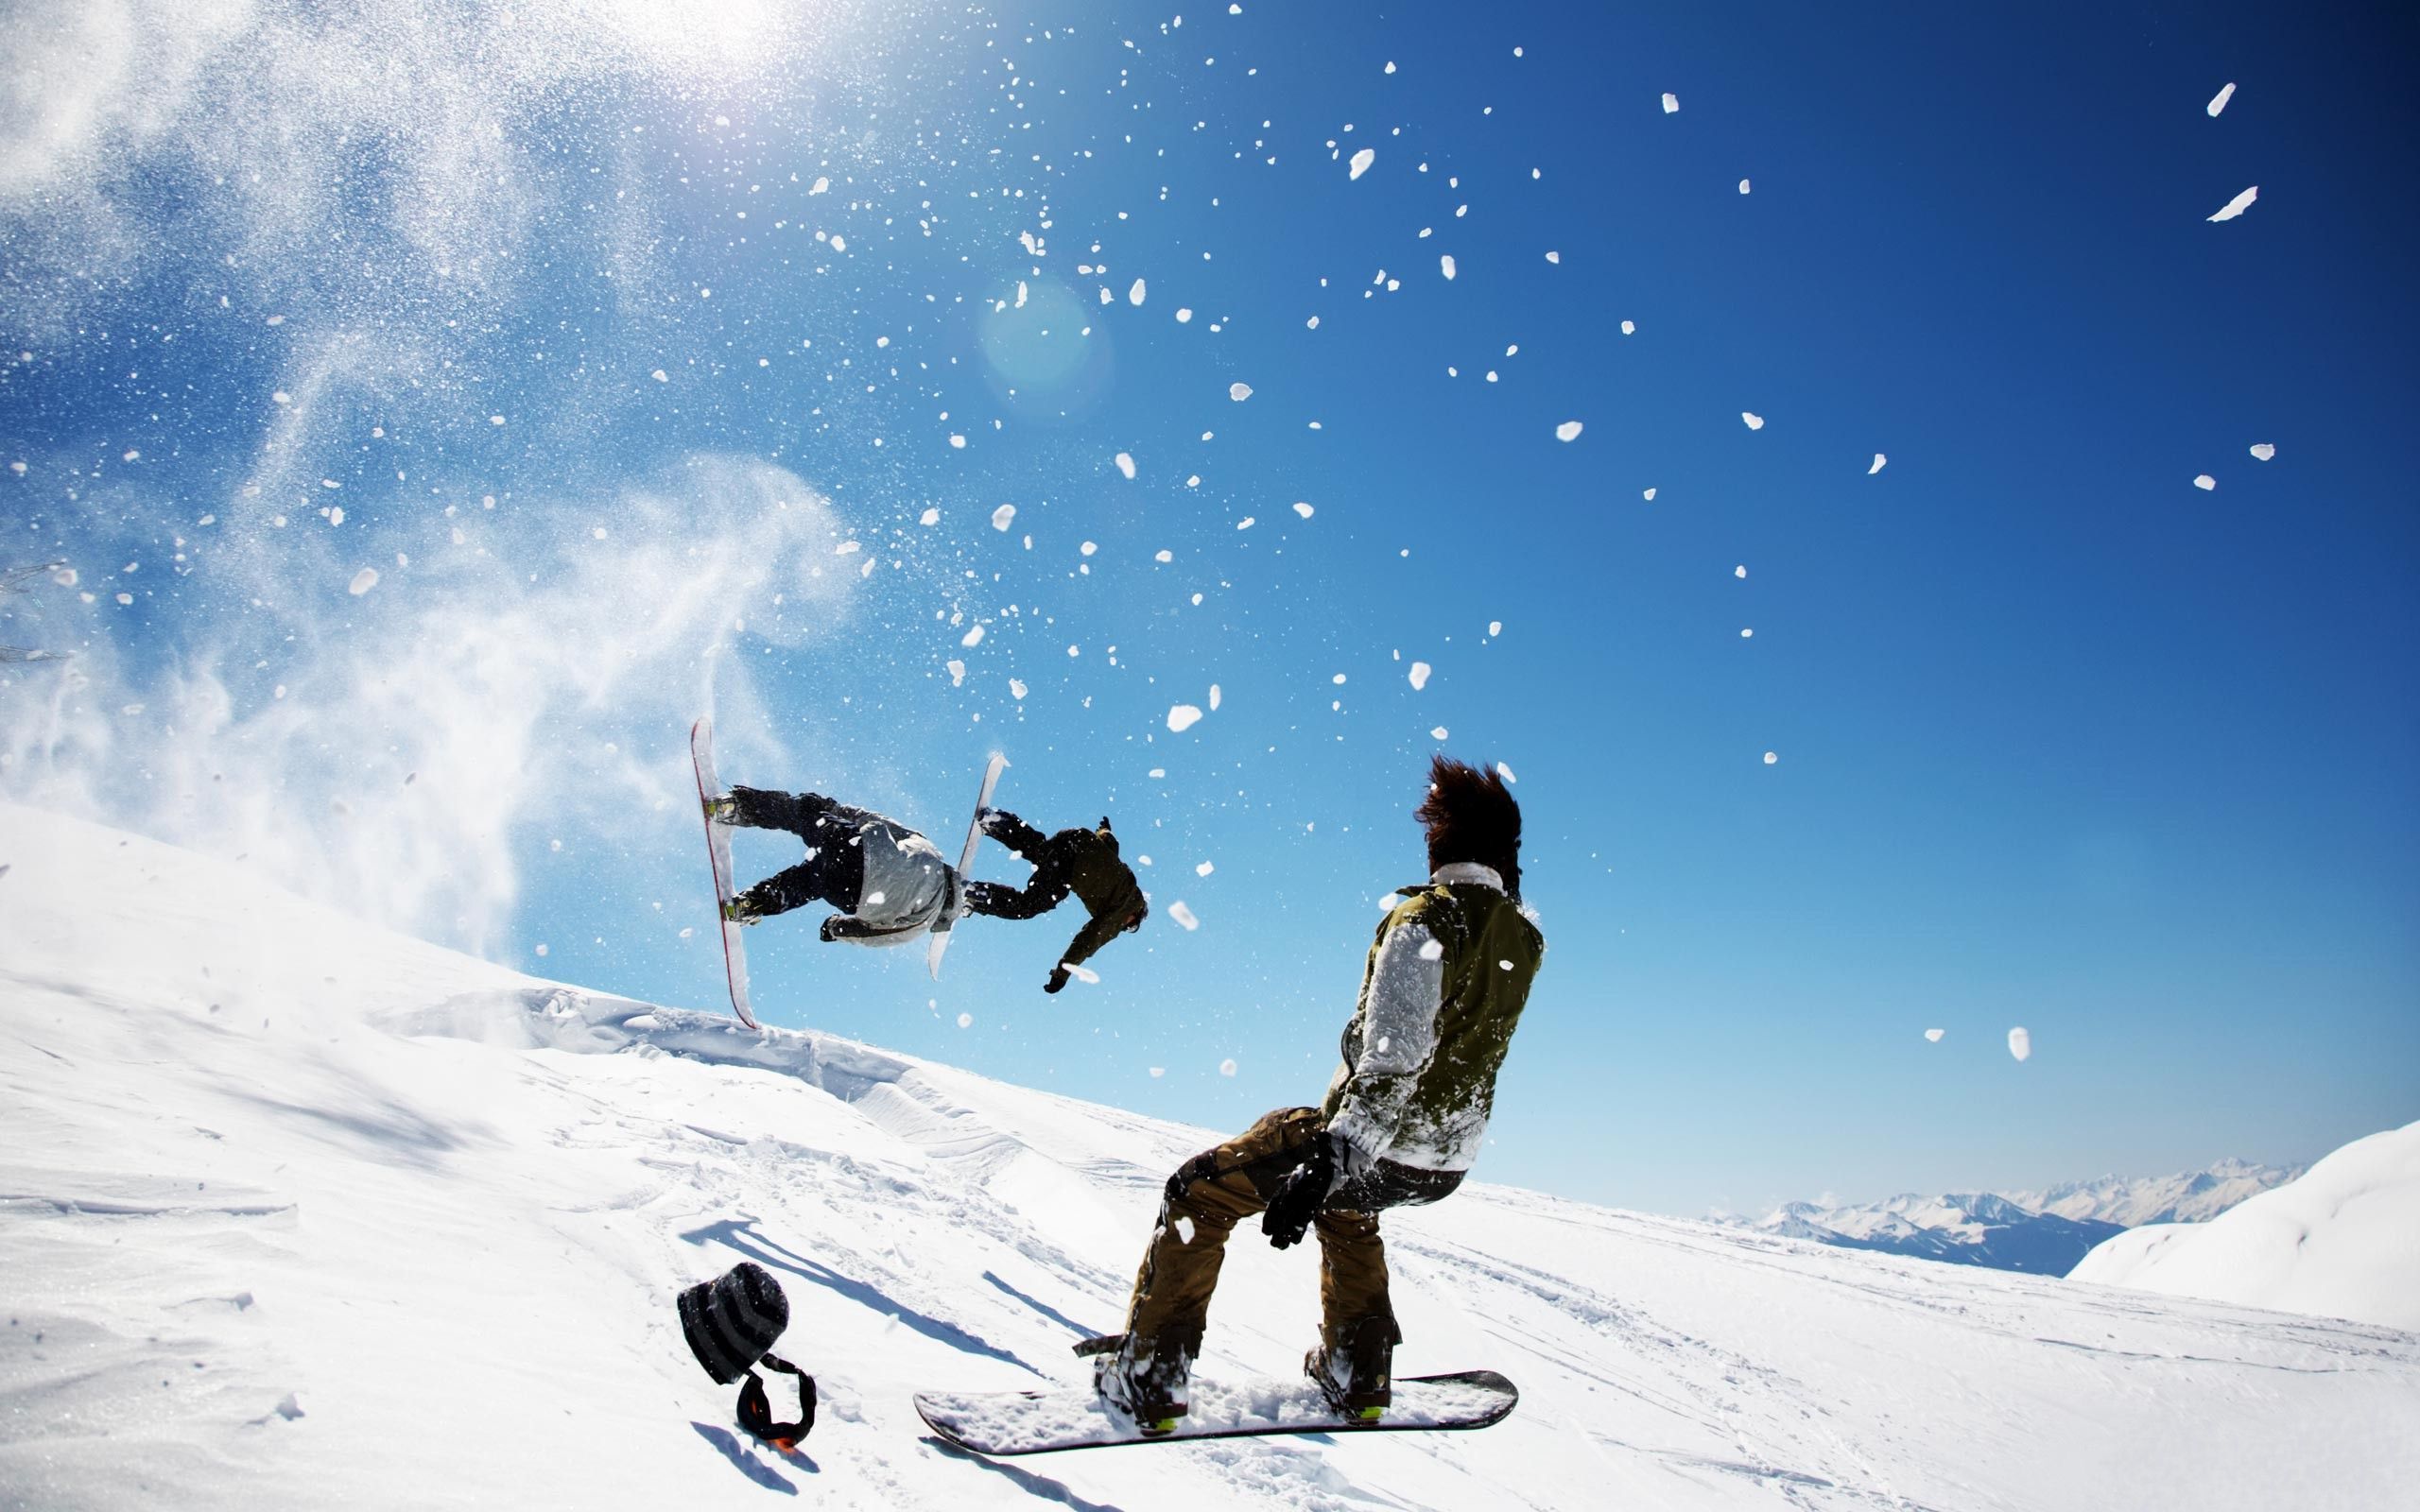 Top Snowboard Wallpaper Snowboarding Sports Images for Pinterest